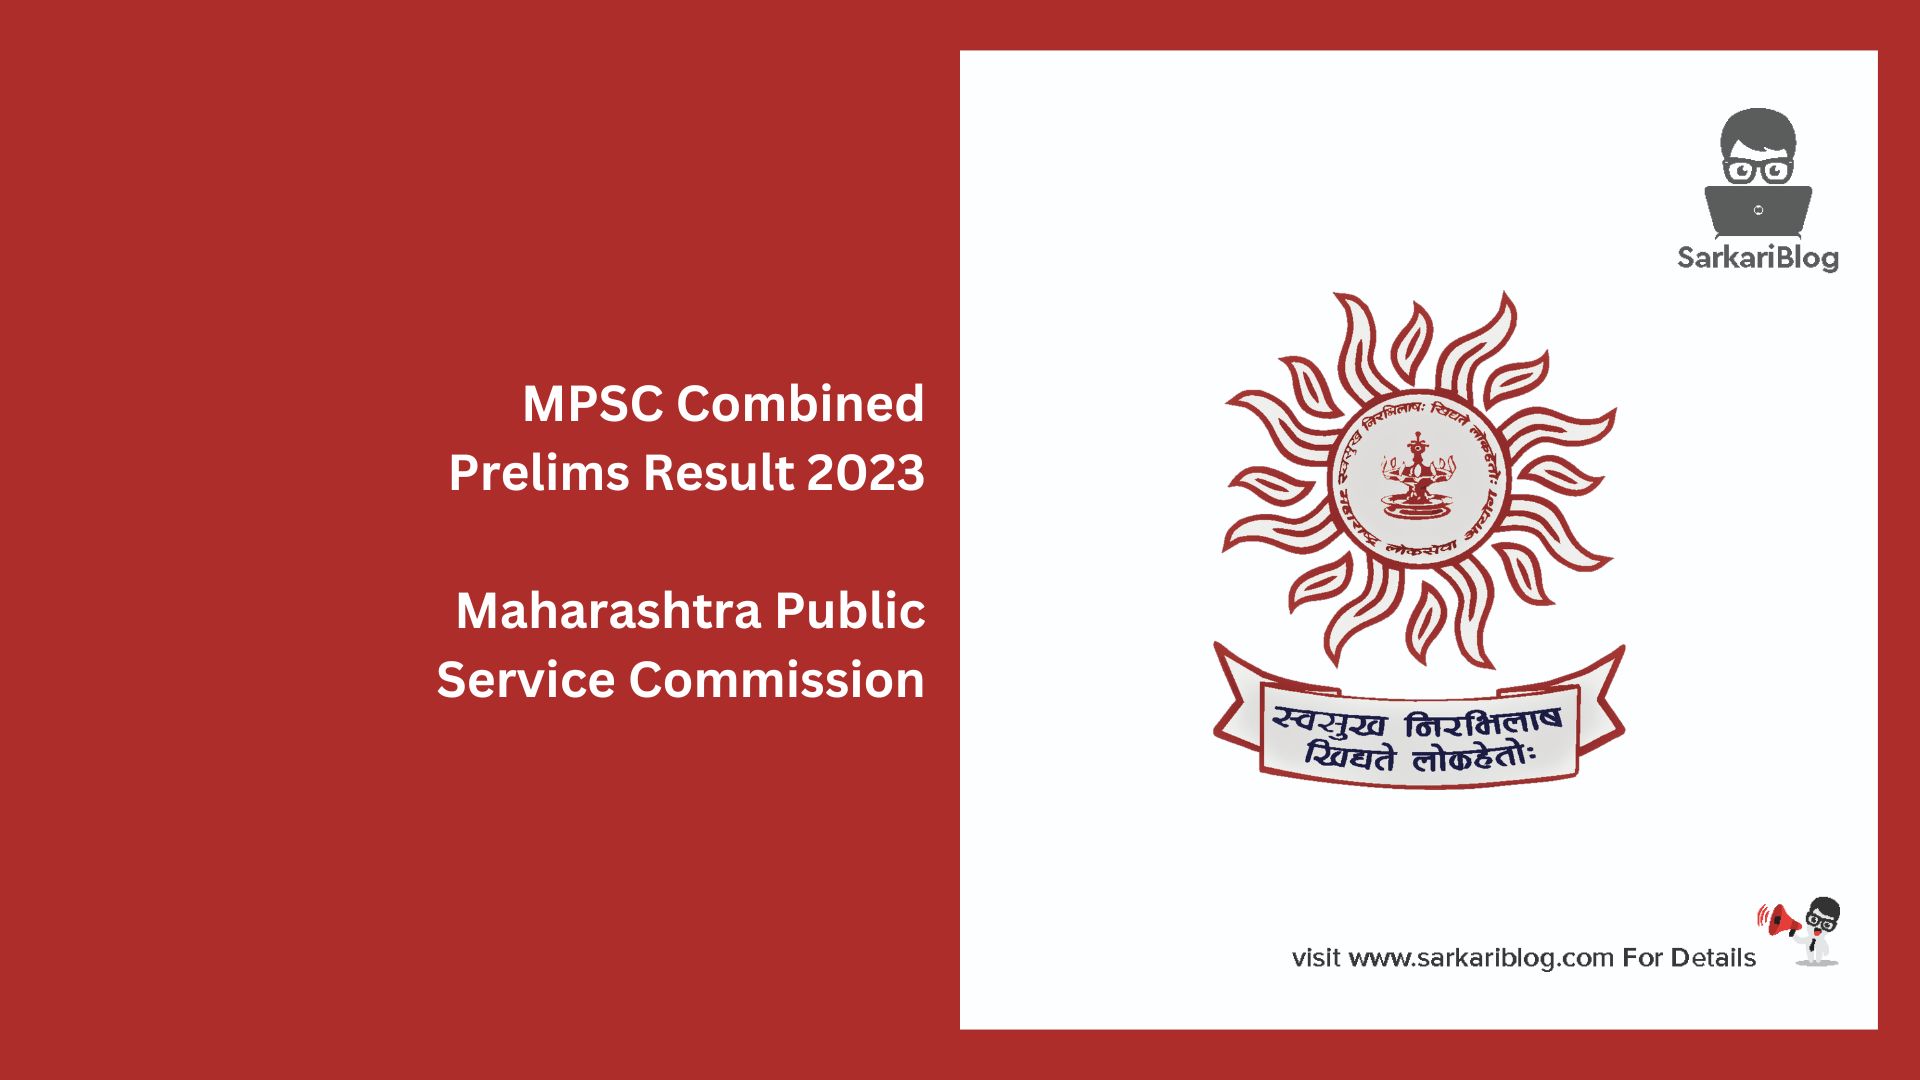 MPSC Combined Prelims Result 2023